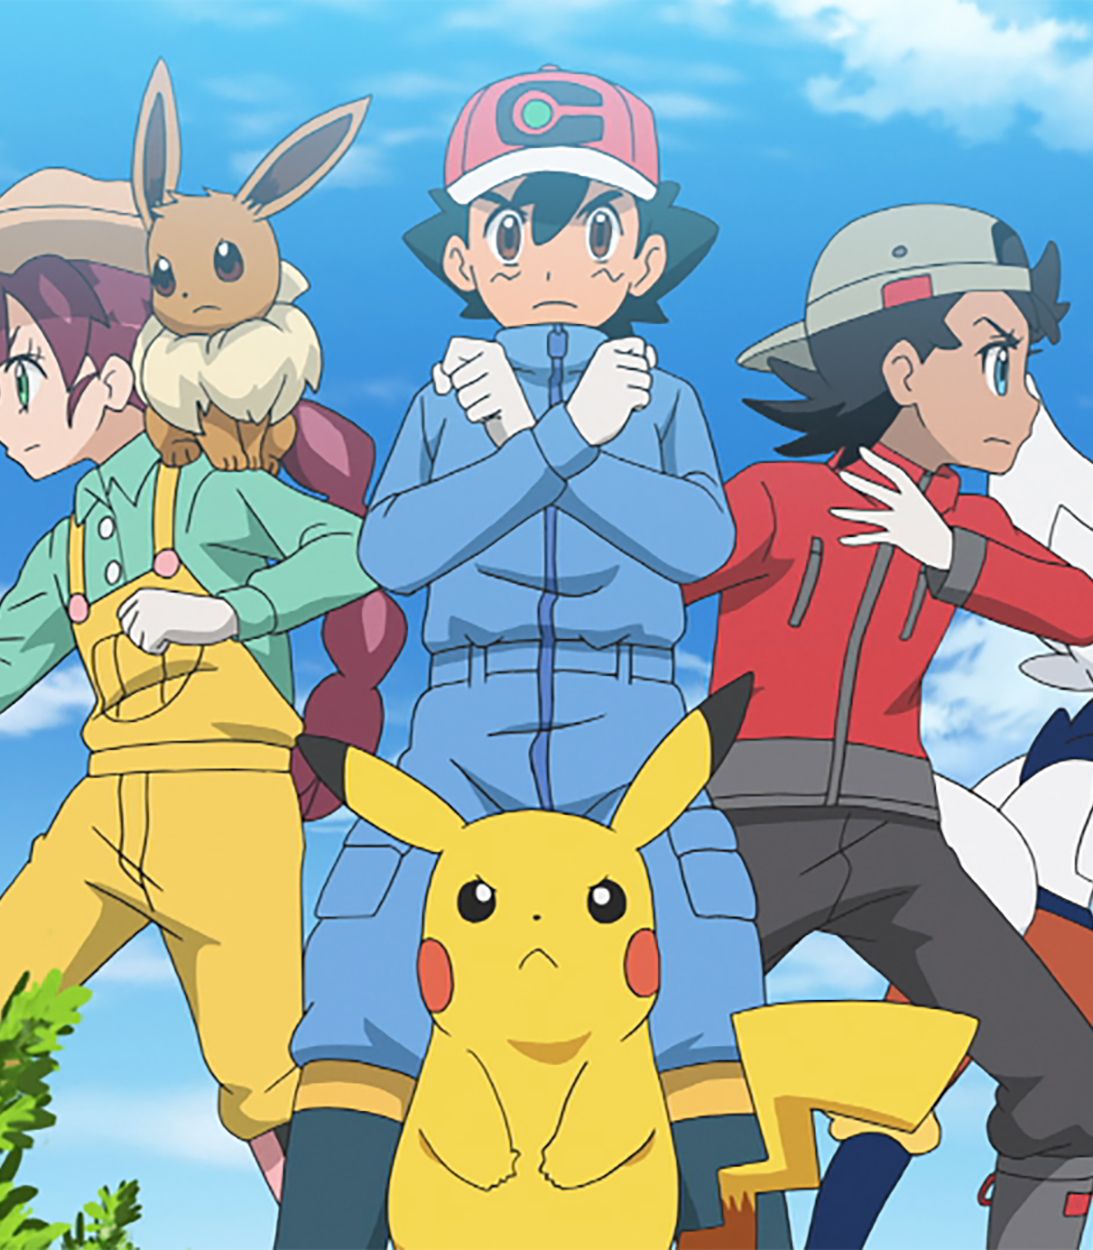 Ash Ketchum and His Friends in Pokémon Master Journeys: The Series.